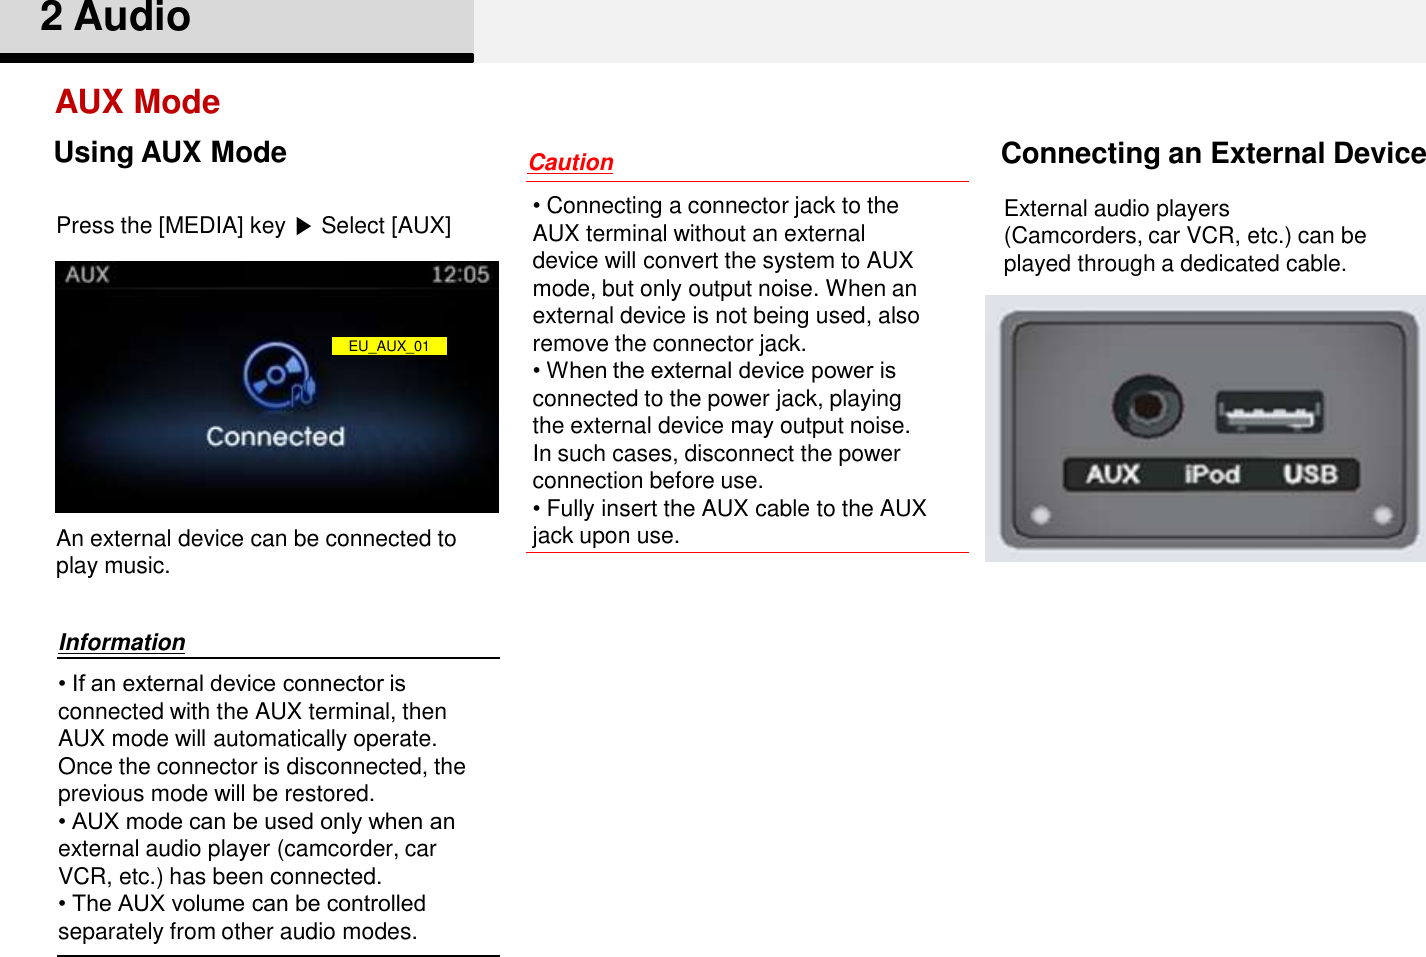 • If an external device connector is connected with the AUX terminal, then AUX mode will automatically operate. Once the connector is disconnected, the previous mode will be restored.• AUX mode can be used only when an external audio player (camcorder, car VCR, etc.) has been connected. • The AUX volume can be controlledseparately from other audio modes.• Connecting a connector jack to theAUX terminal without an externaldevice will convert the system to AUXmode, but only output noise. When anexternal device is not being used, alsoremove the connector jack.• When the external device power isconnected to the power jack, playingthe external device may output noise.In such cases, disconnect the powerconnection before use.• Fully insert the AUX cable to the AUX jack upon use. AUX ModeConnecting an External Device2 AudioInformationCautionExternal audio players(Camcorders, car VCR, etc.) can beplayed through a dedicated cable. Press the [MEDIA] key ▶Select [AUX]An external device can be connected to play music. Using AUX ModeEU_AUX_01